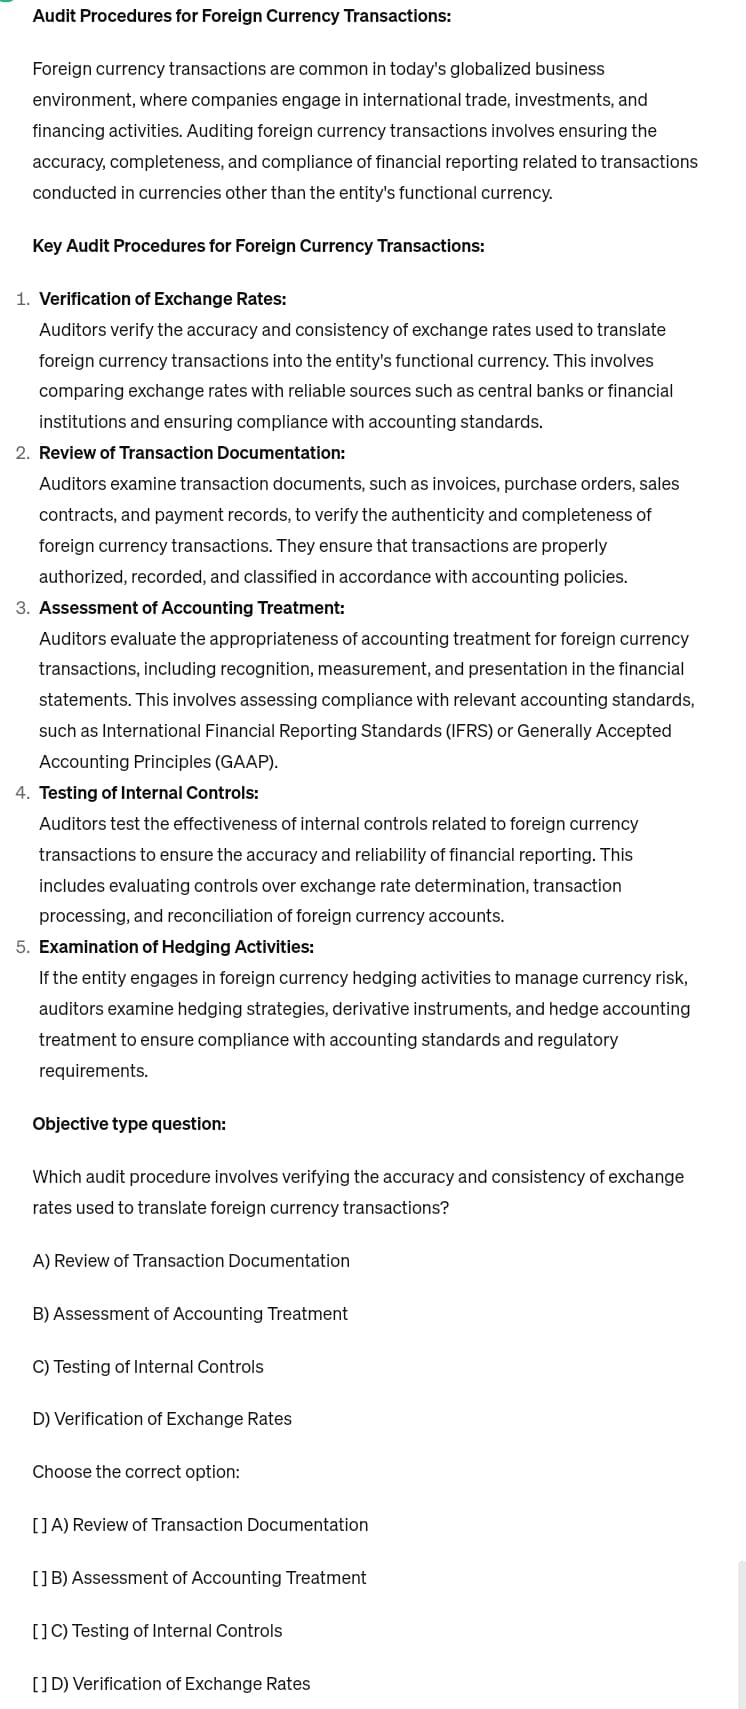 Audit Procedures for Foreign Currency Transactions:
Foreign currency transactions are common in today's globalized business
environment, where companies engage in international trade, investments, and
financing activities. Auditing foreign currency transactions involves ensuring the
accuracy, completeness, and compliance of financial reporting related to transactions.
conducted in currencies other than the entity's functional currency.
Key Audit Procedures for Foreign Currency Transactions:
1. Verification of Exchange Rates:
Auditors verify the accuracy and consistency of exchange rates used to translate
foreign currency transactions into the entity's functional currency. This involves
comparing exchange rates with reliable sources such as central banks or financial
institutions and ensuring compliance with accounting standards.
2. Review of Transaction Documentation:
Auditors examine transaction documents, such as invoices, purchase orders, sales
contracts, and payment records, to verify the authenticity and completeness of
foreign currency transactions. They ensure that transactions are properly
authorized, recorded, and classified in accordance with accounting policies.
3. Assessment of Accounting Treatment:
Auditors evaluate the appropriateness of accounting treatment for foreign currency
transactions, including recognition, measurement, and presentation in the financial
statements. This involves assessing compliance with relevant accounting standards,
such as International Financial Reporting Standards (IFRS) or Generally Accepted
Accounting Principles (GAAP).
4. Testing of Internal Controls:
Auditors test the effectiveness of internal controls related to foreign currency
transactions to ensure the accuracy and reliability of financial reporting. This
includes evaluating controls over exchange rate determination, transaction
processing, and reconciliation of foreign currency accounts.
5. Examination of Hedging Activities:
If the entity engages in foreign currency hedging activities to manage currency risk,
auditors examine hedging strategies, derivative instruments, and hedge accounting
treatment to ensure compliance with accounting standards and regulatory
requirements.
Objective type question:
Which audit procedure involves verifying the accuracy and consistency of exchange
rates used to translate foreign currency transactions?
A) Review of Transaction Documentation
B) Assessment of Accounting Treatment
C) Testing of Internal Controls
D) Verification of Exchange Rates
Choose the correct option:
[] A) Review of Transaction Documentation
[] B) Assessment of Accounting Treatment
[] C) Testing of Internal Controls
[] D) Verification of Exchange Rates